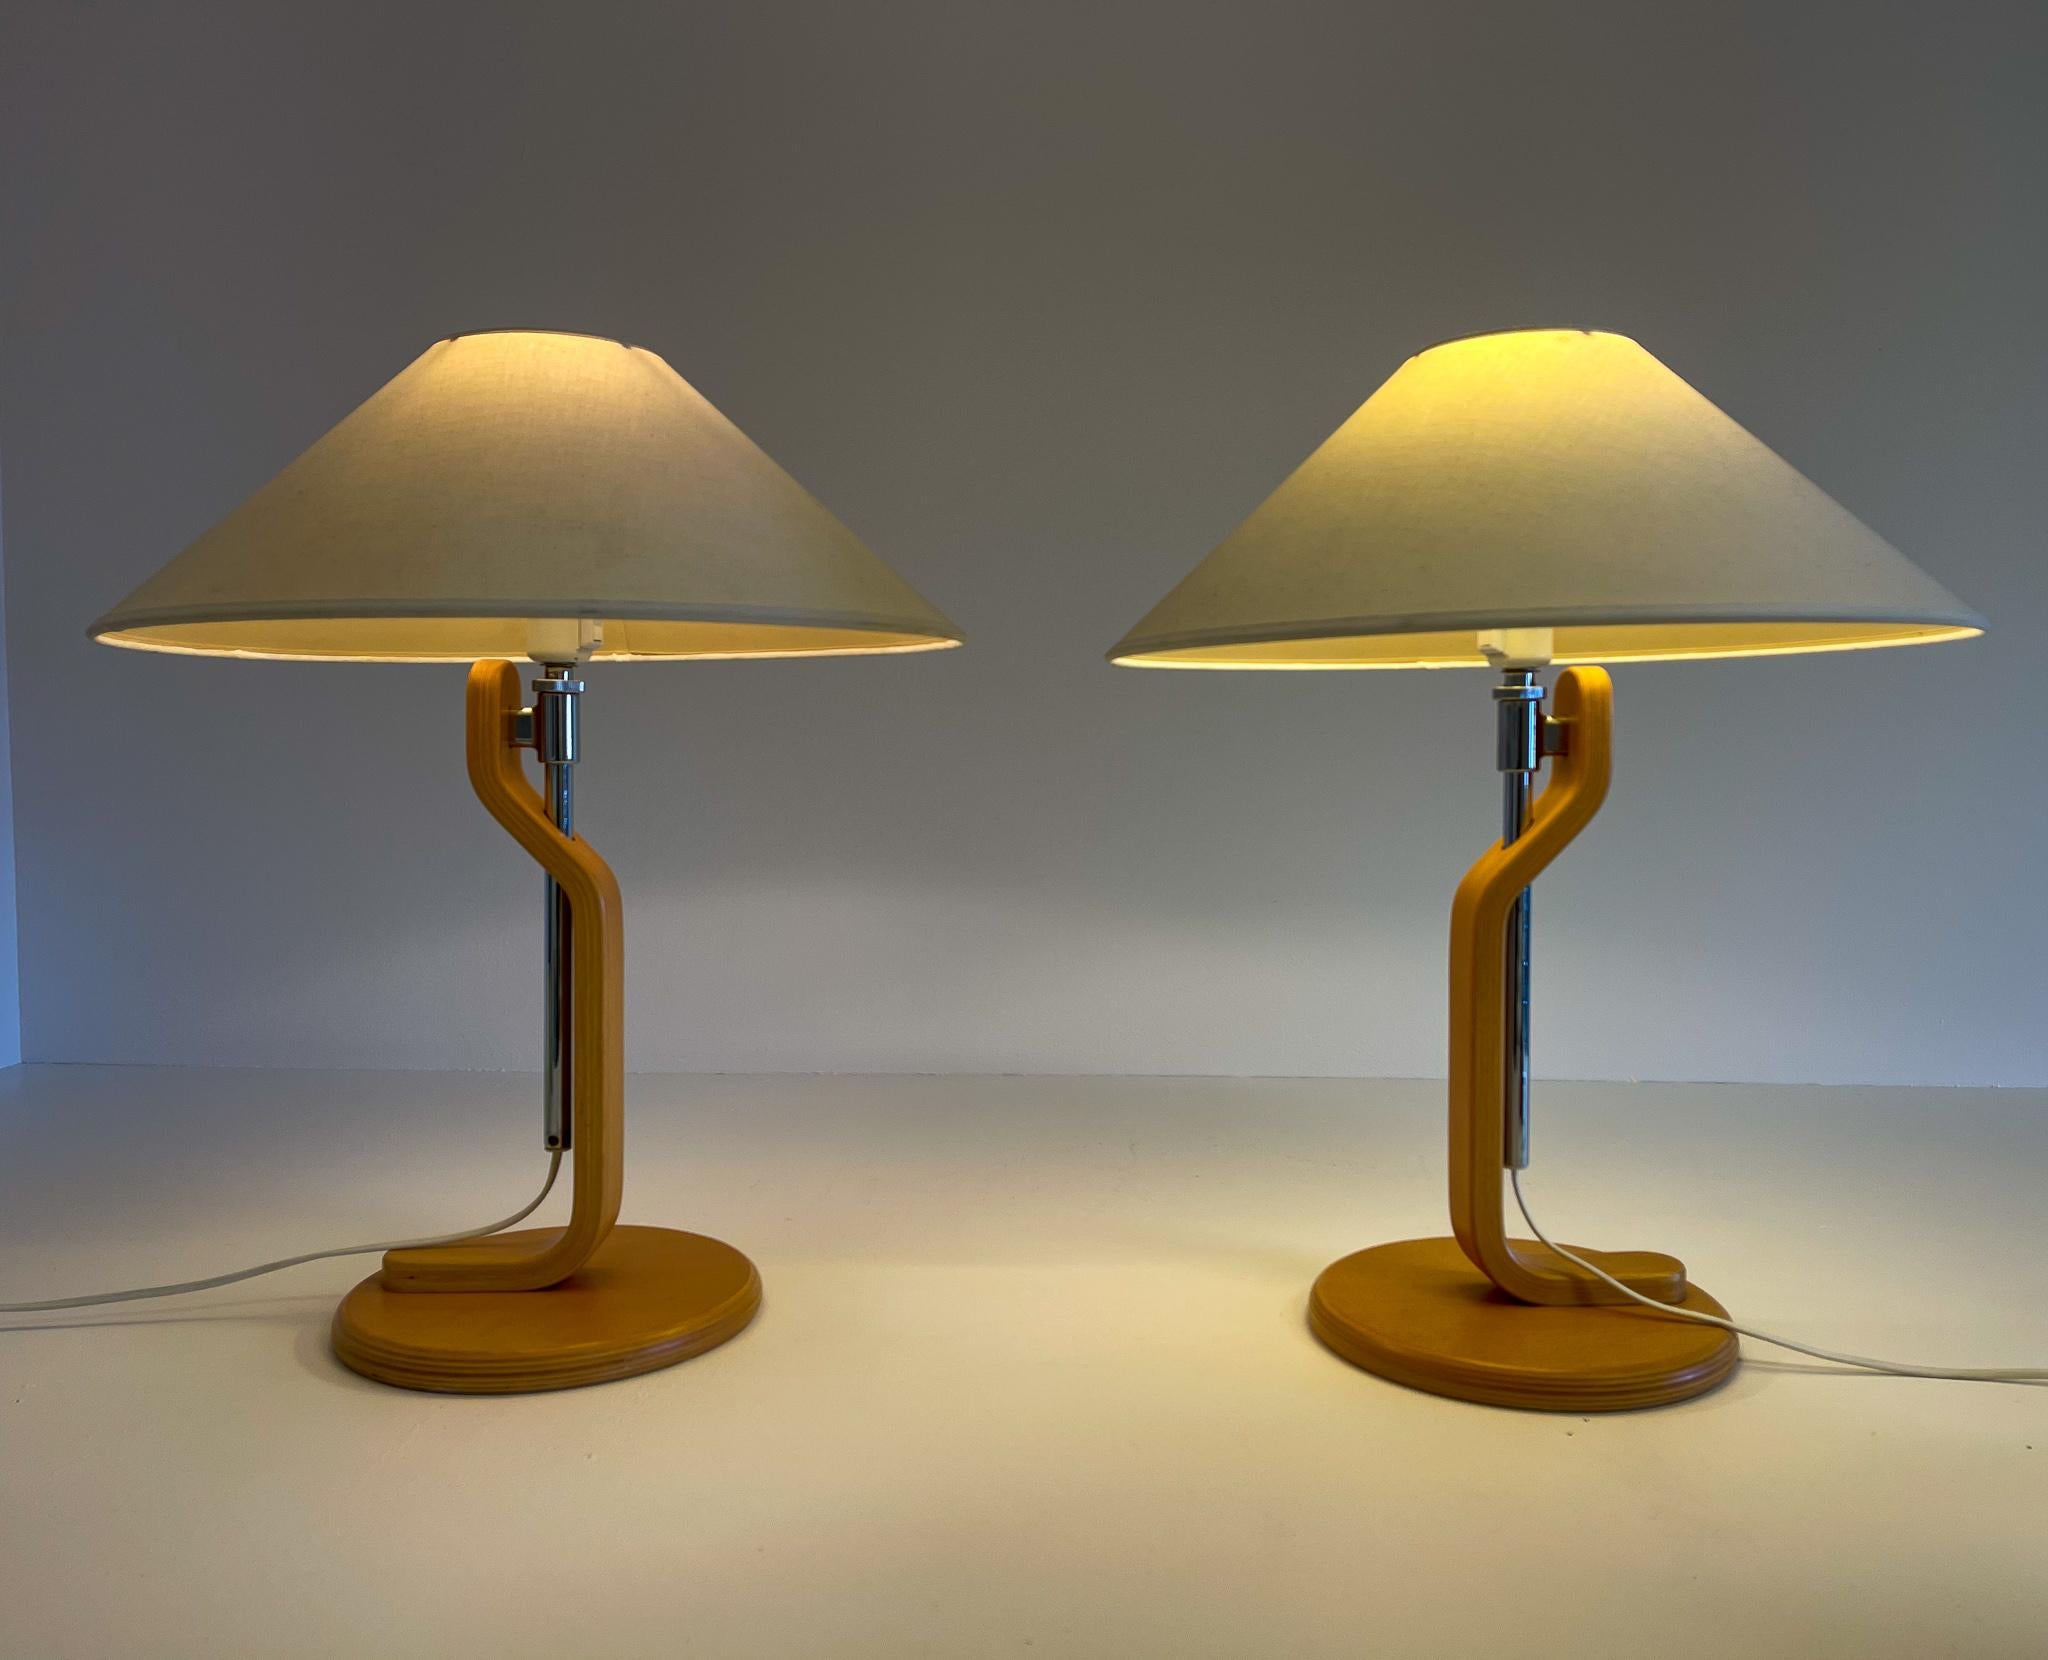 These 1980s table lamps, model 